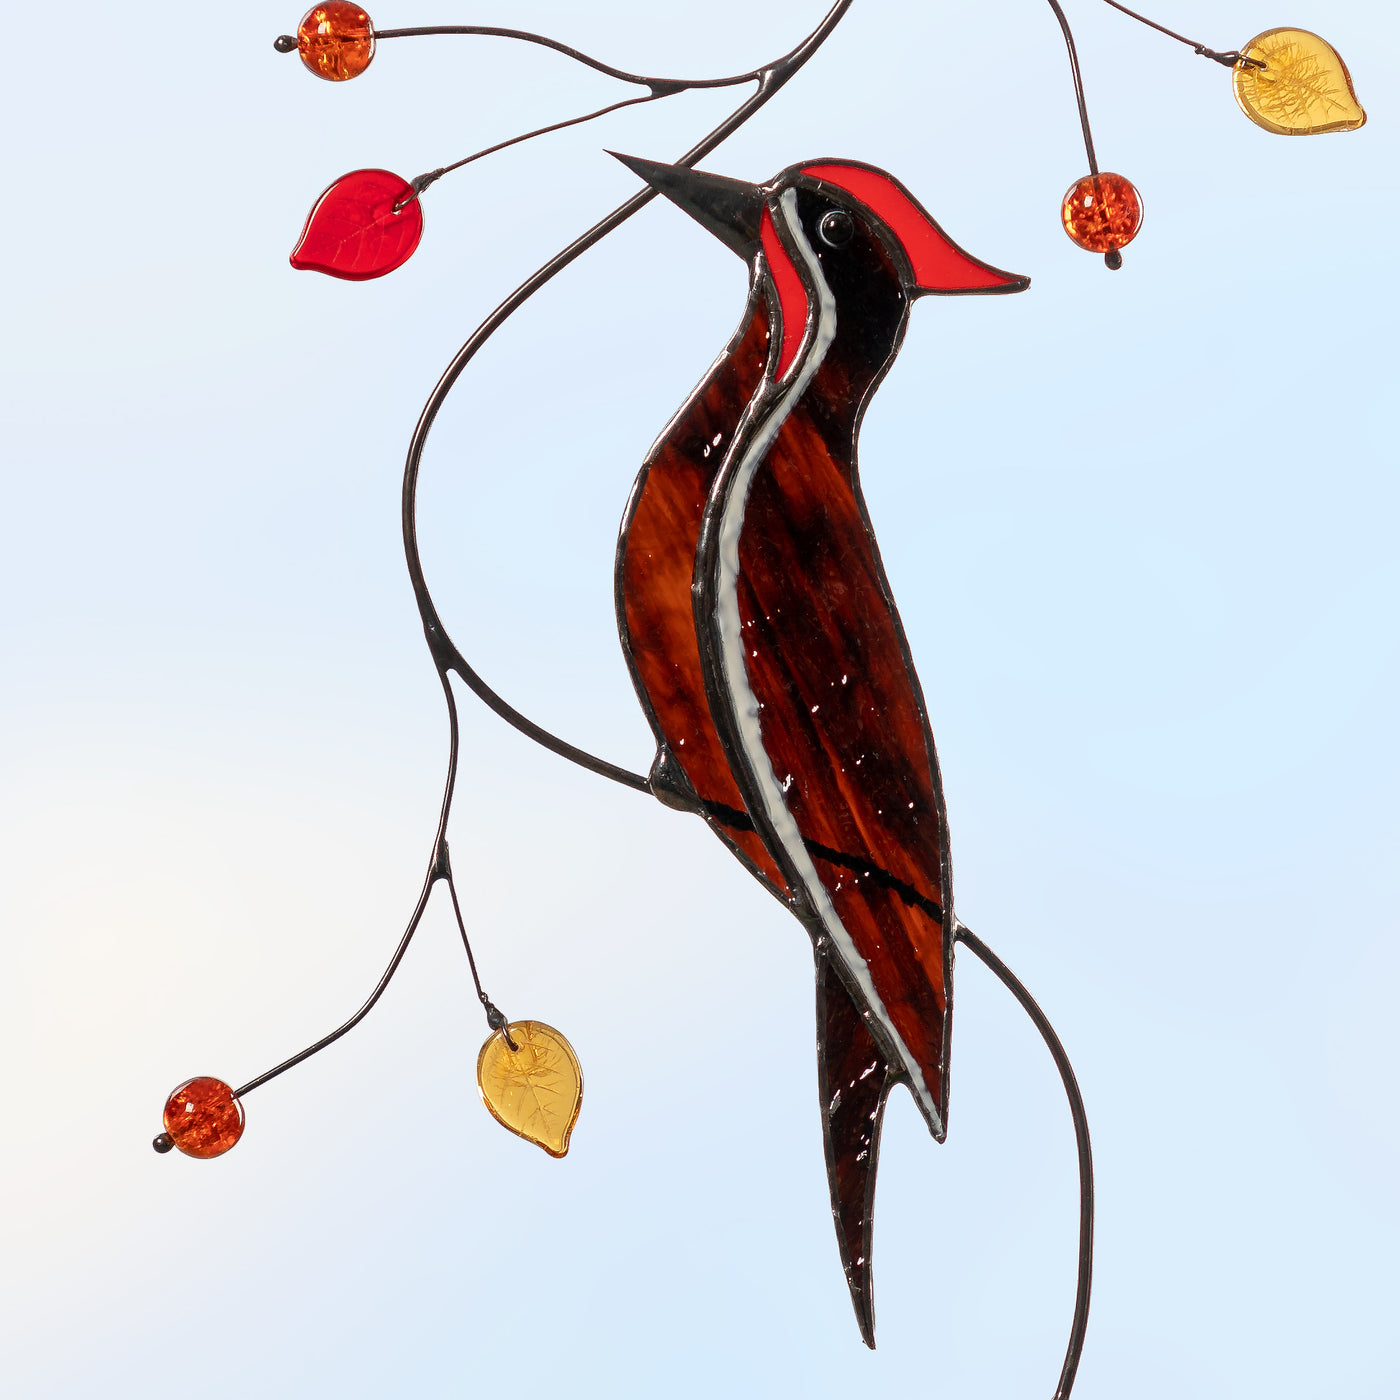 Pileated woodpecker on the branch stained glass suncatcher  Edit alt text